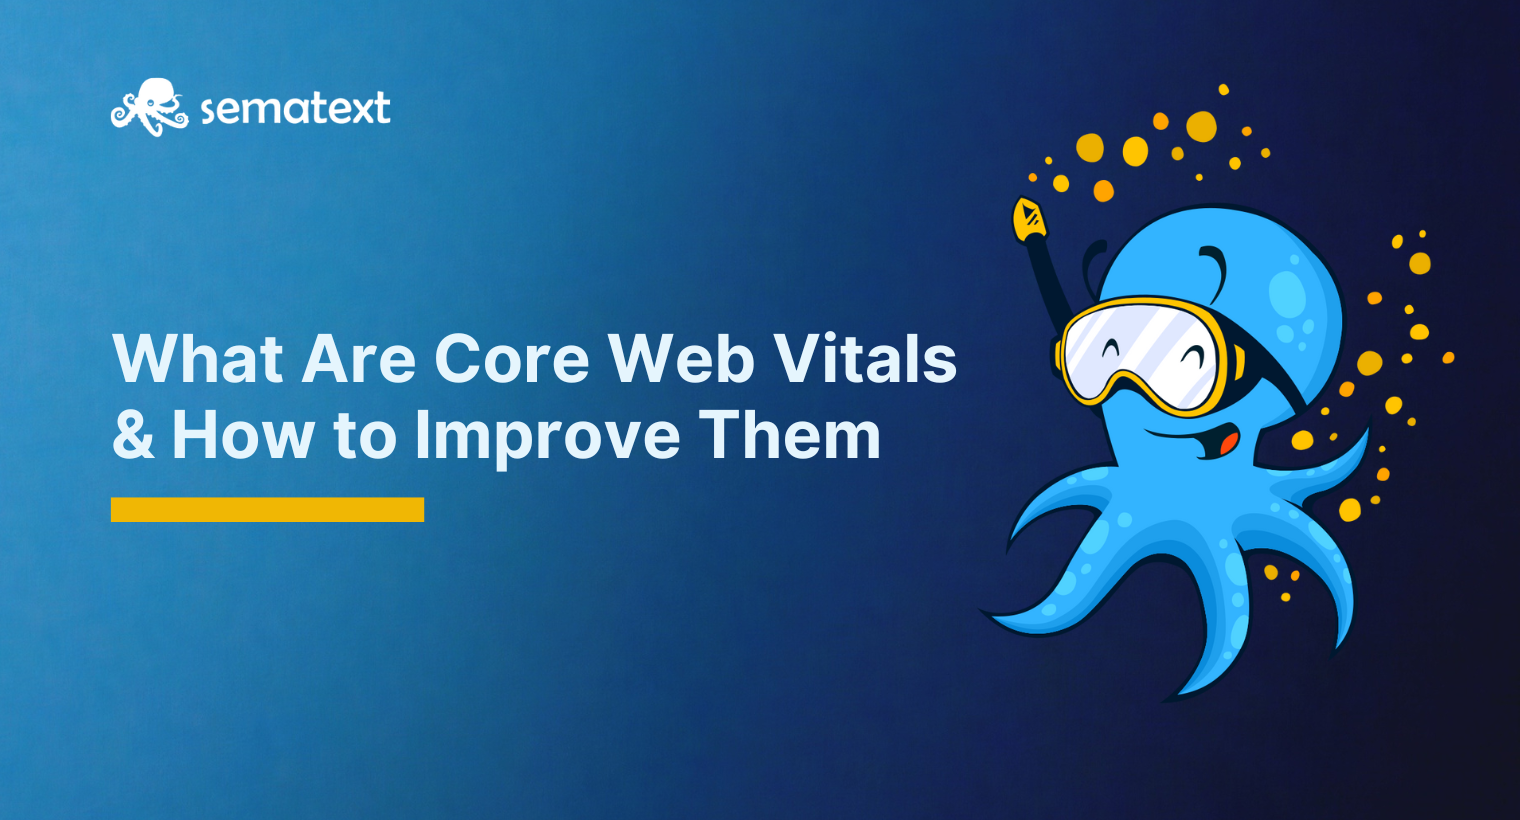 A Complete Guide to Google’s Core Web Vitals and How to Optimize Them